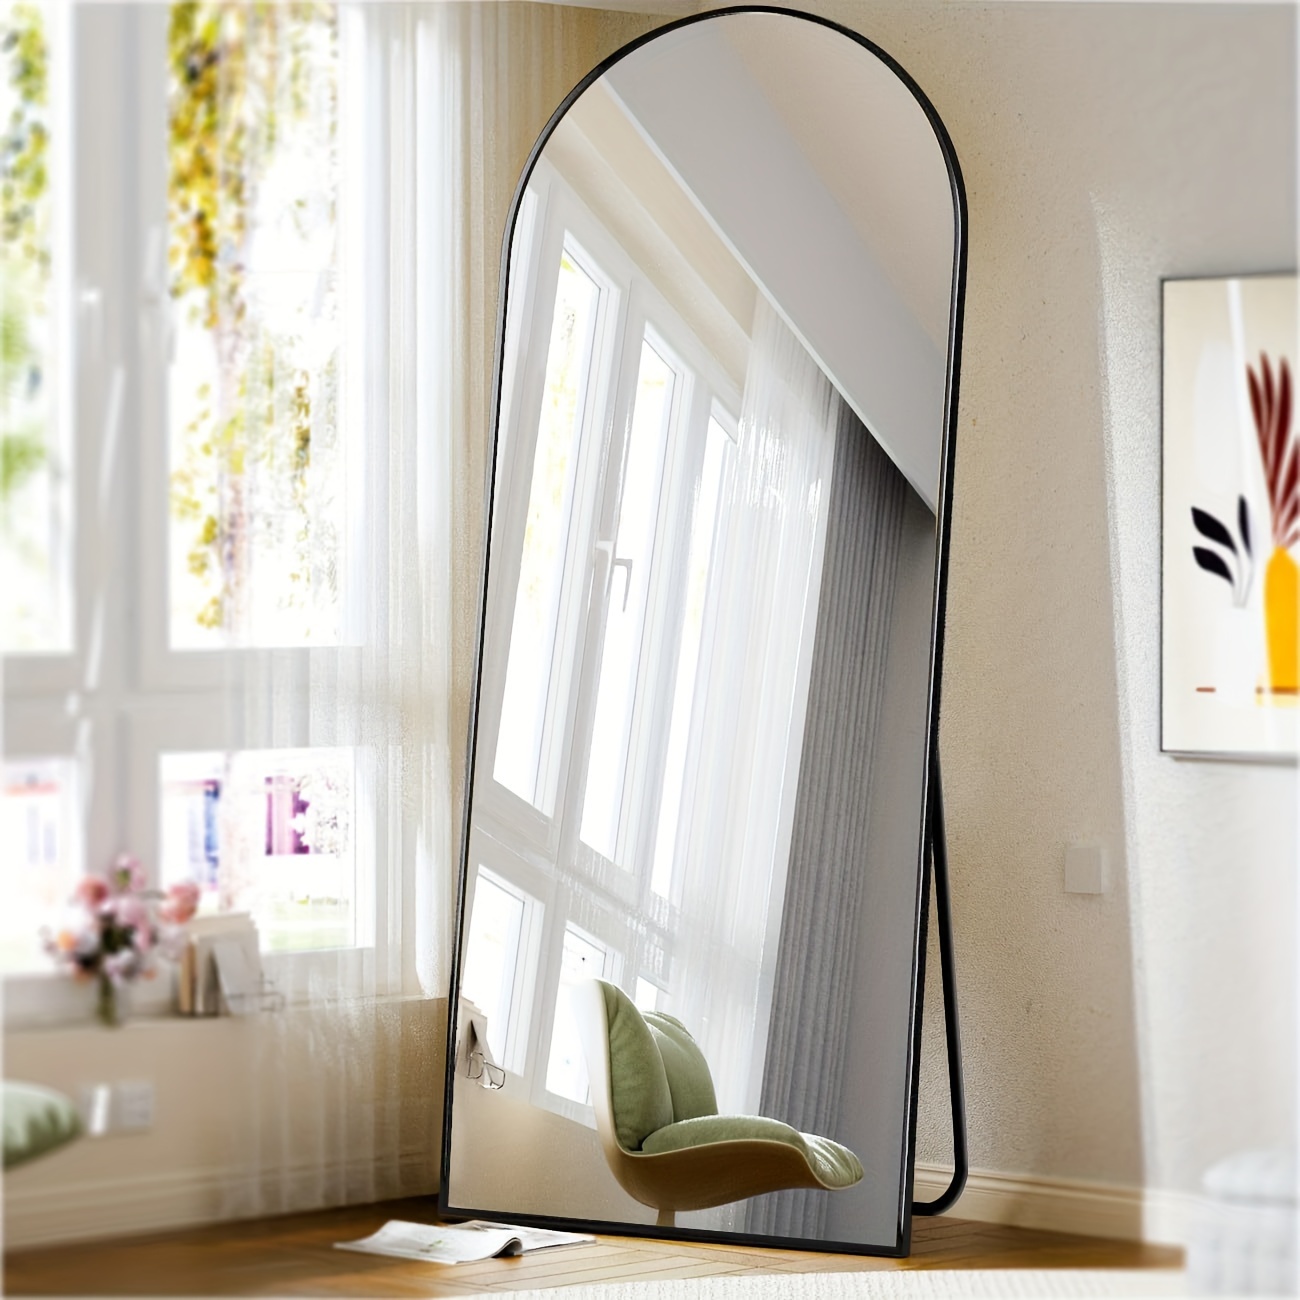 

71"x26" Arch Full Length Mirror, Wall Mirror Floor Mirror With Stand Hanging Or Leaning, Aluminum Alloy Frame Full Body Mirror For Bedroom, Dressing Room